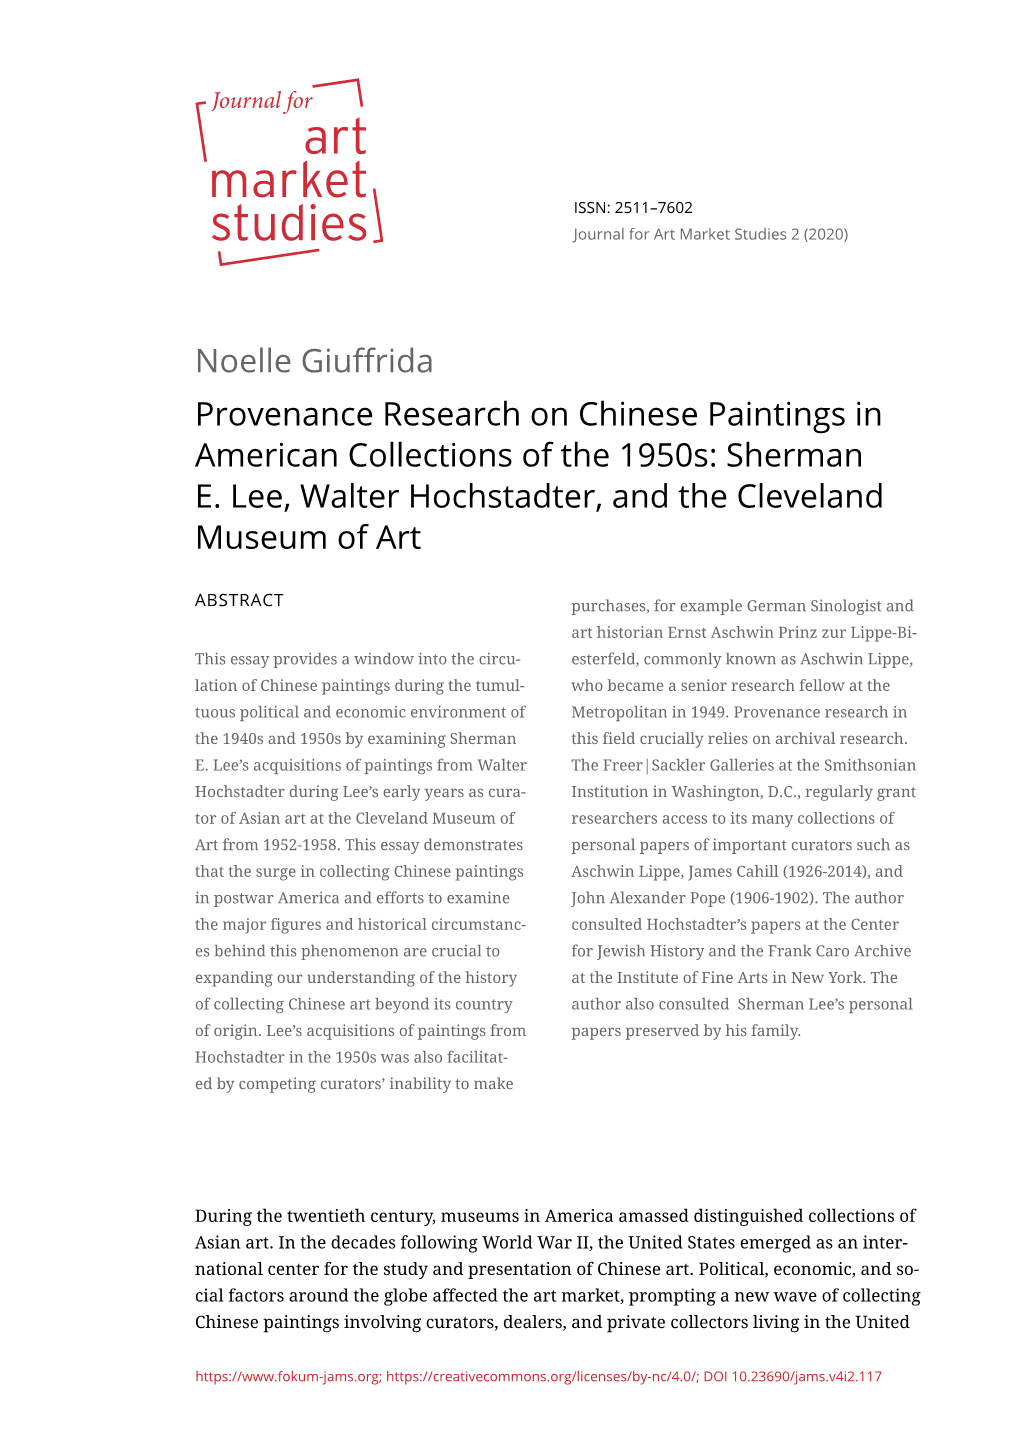 Noelle Giuffrida Provenance Research on Chinese Paintings in American Collections of the 1950S: Sherman E